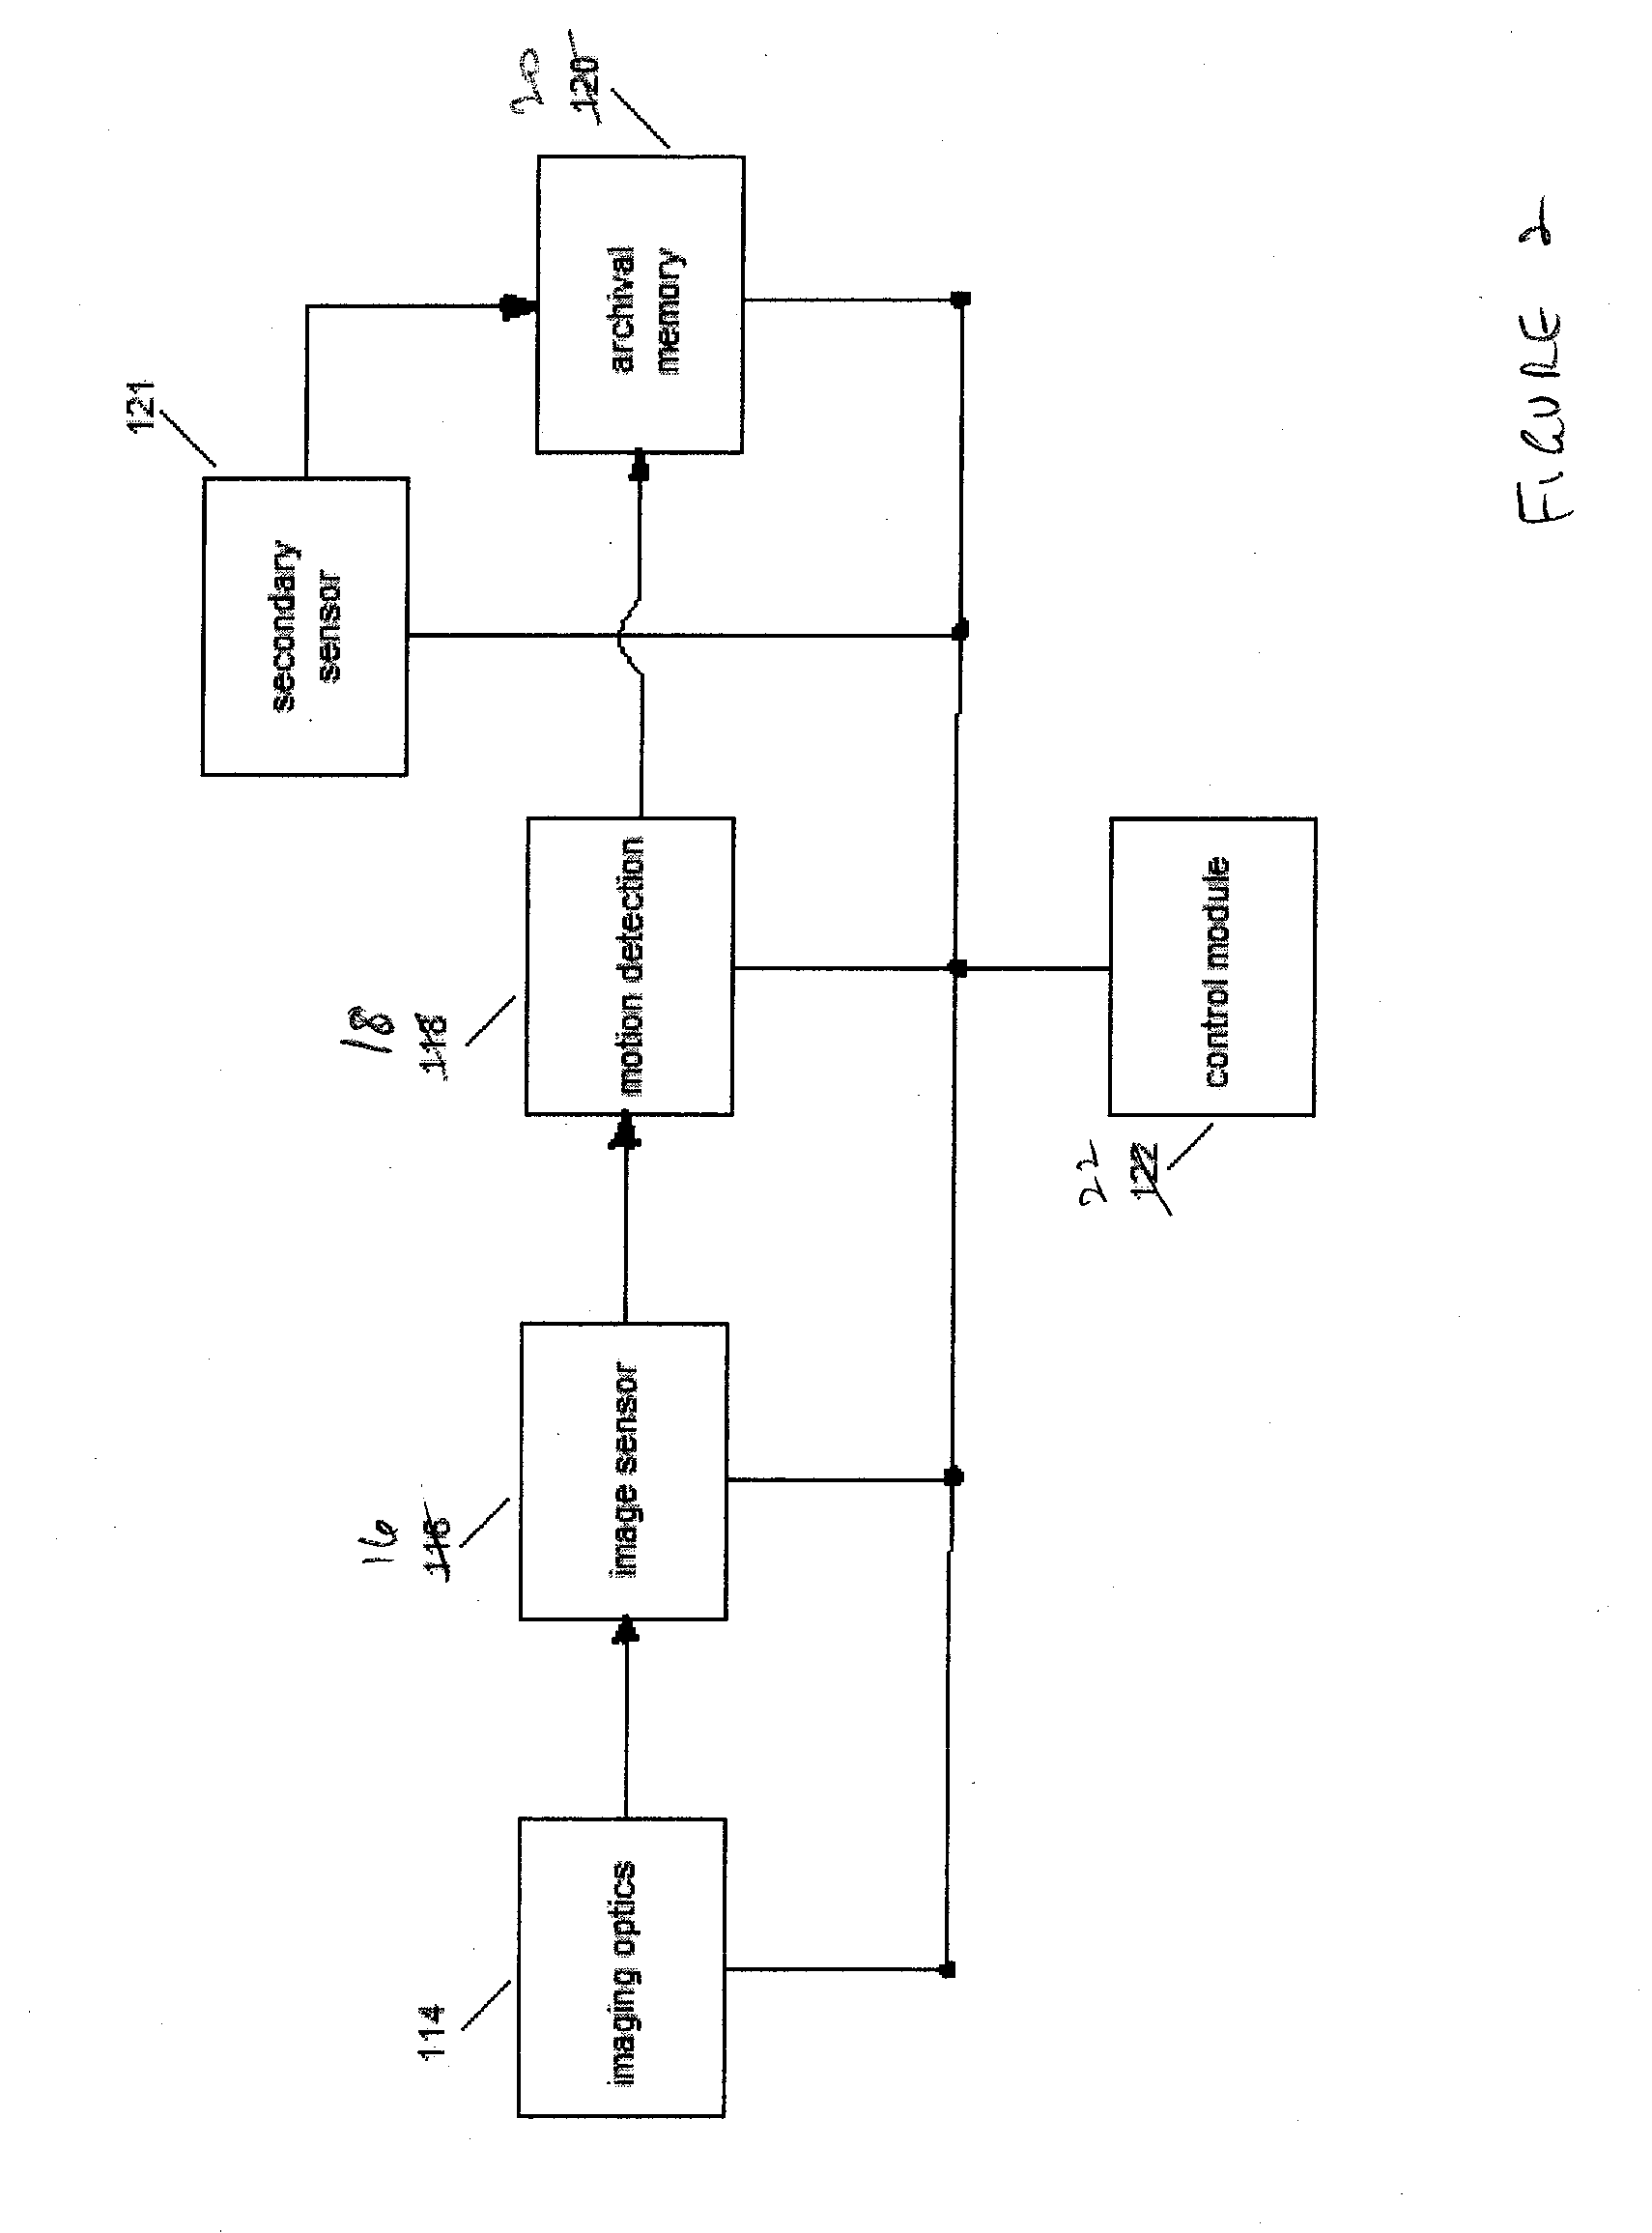 Onboard data storage and method